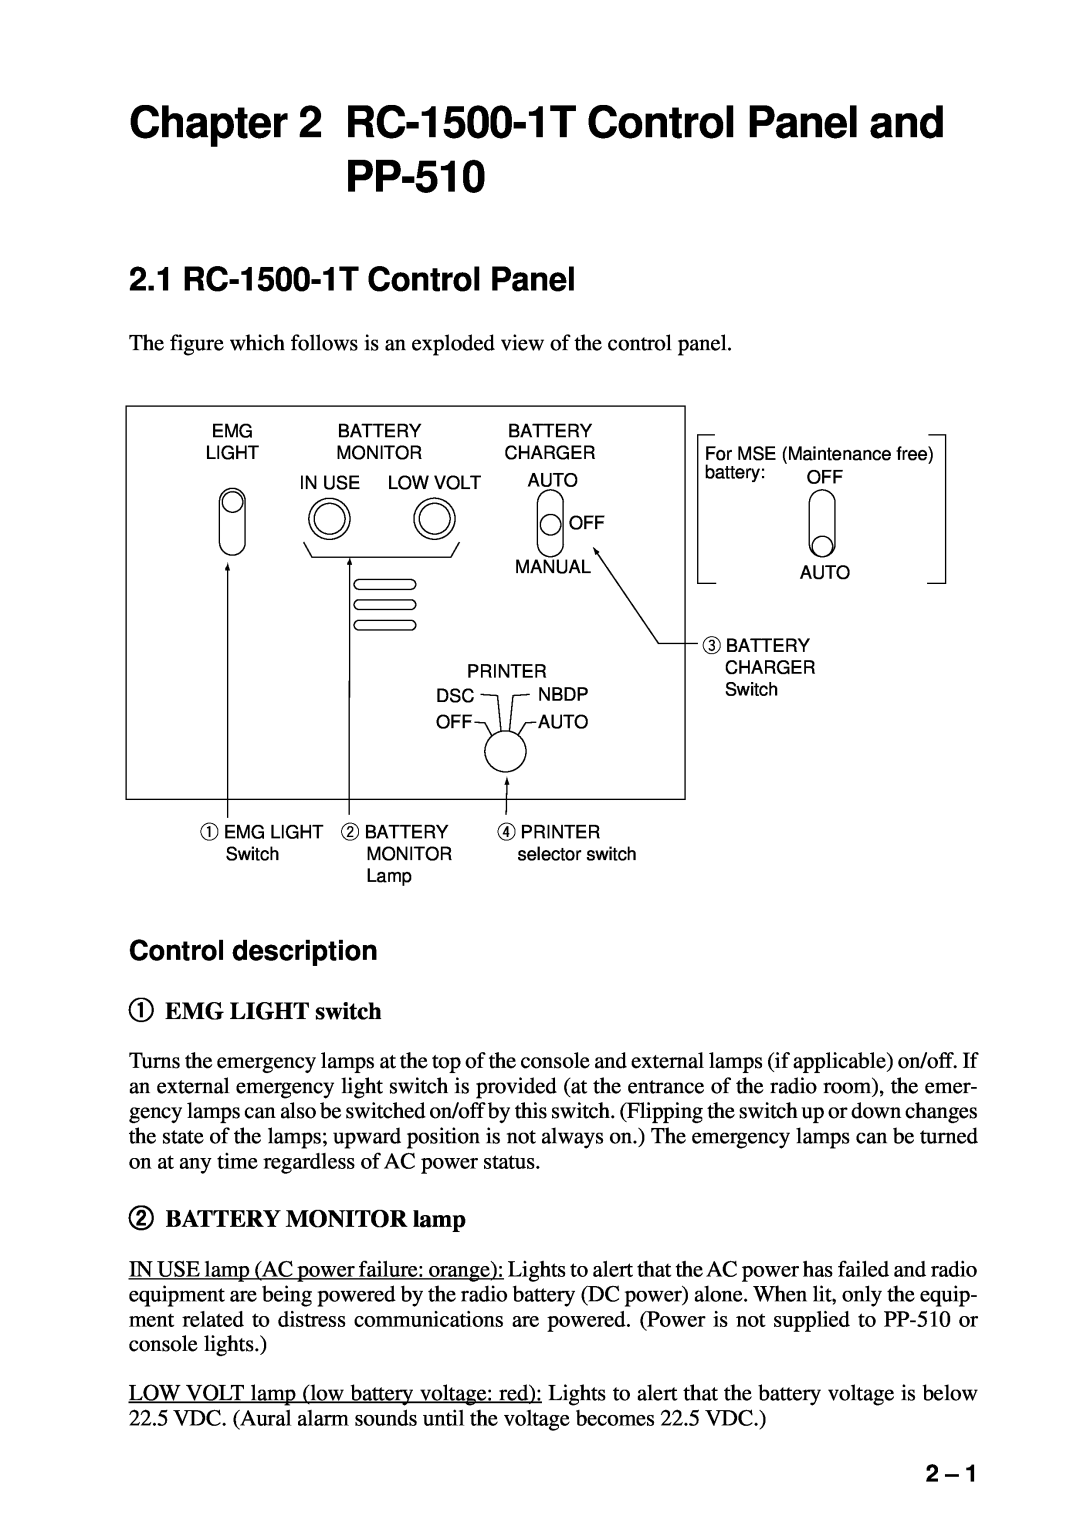 Furuno manual RC-1500-1T Control Panel and PP-510, 2.1 RC-1500-1T Control Panel, Control description, EMG LIGHT switch 